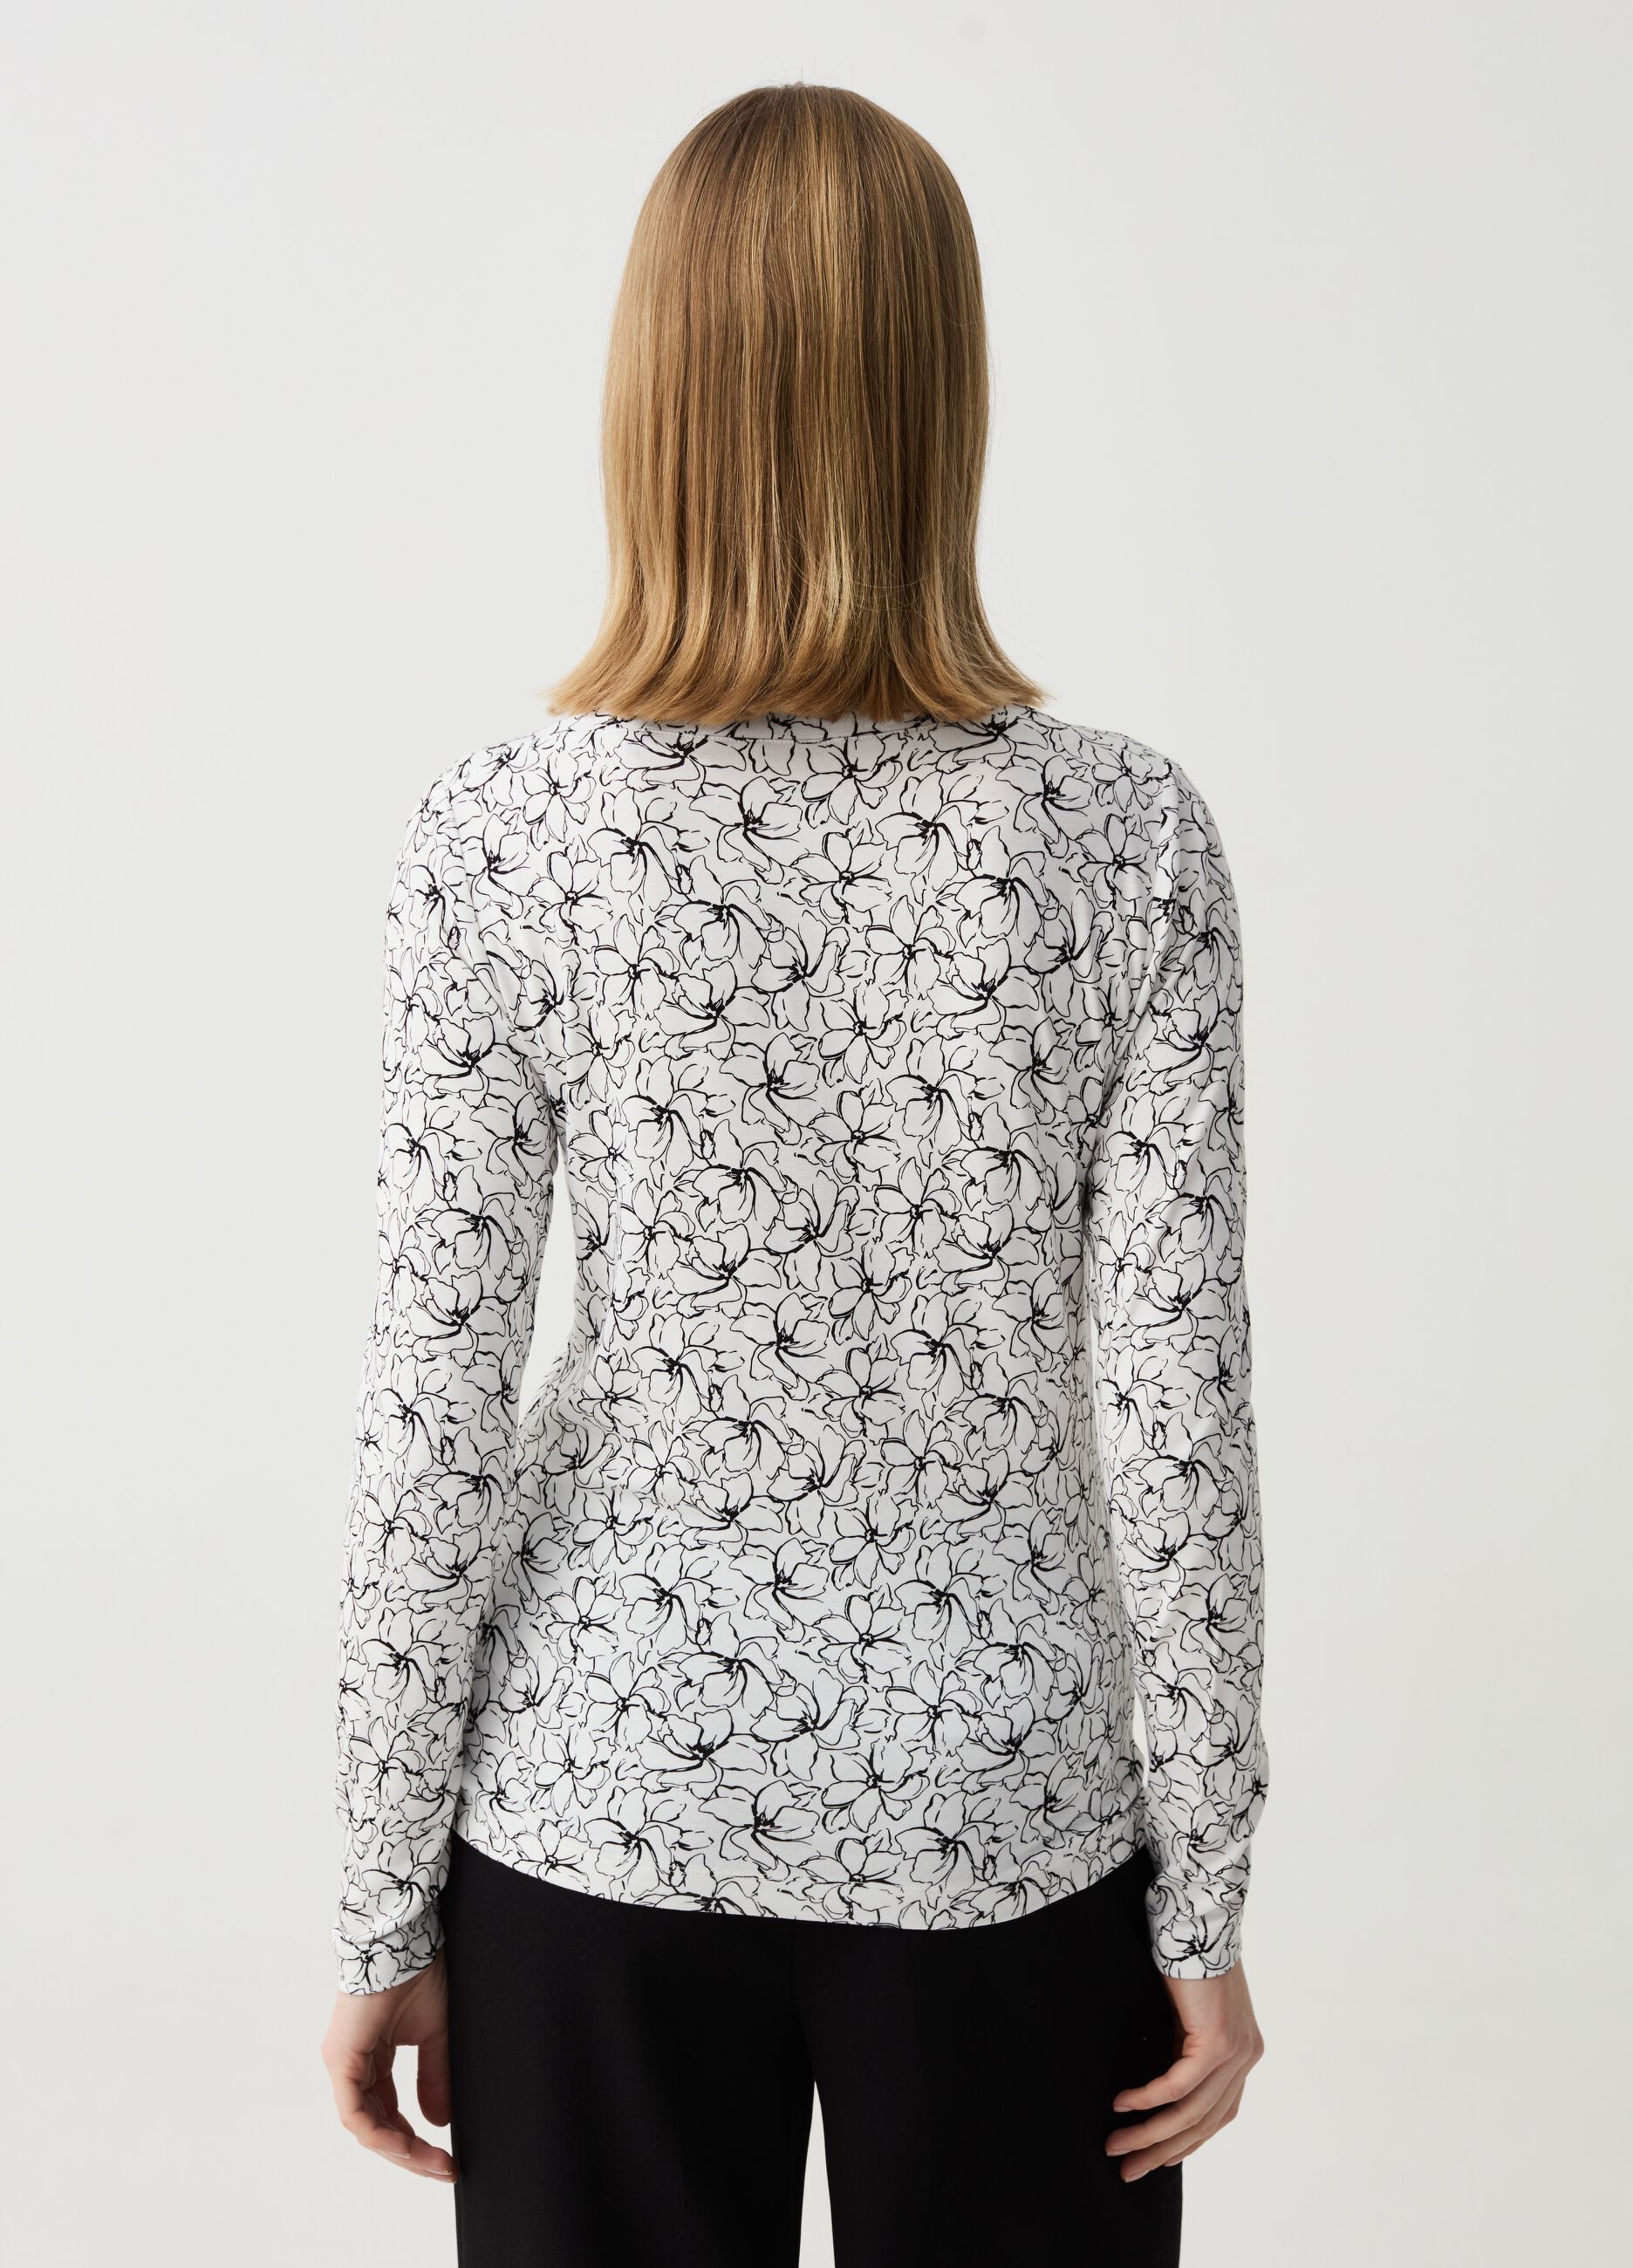 Floral T-shirt with boat neck